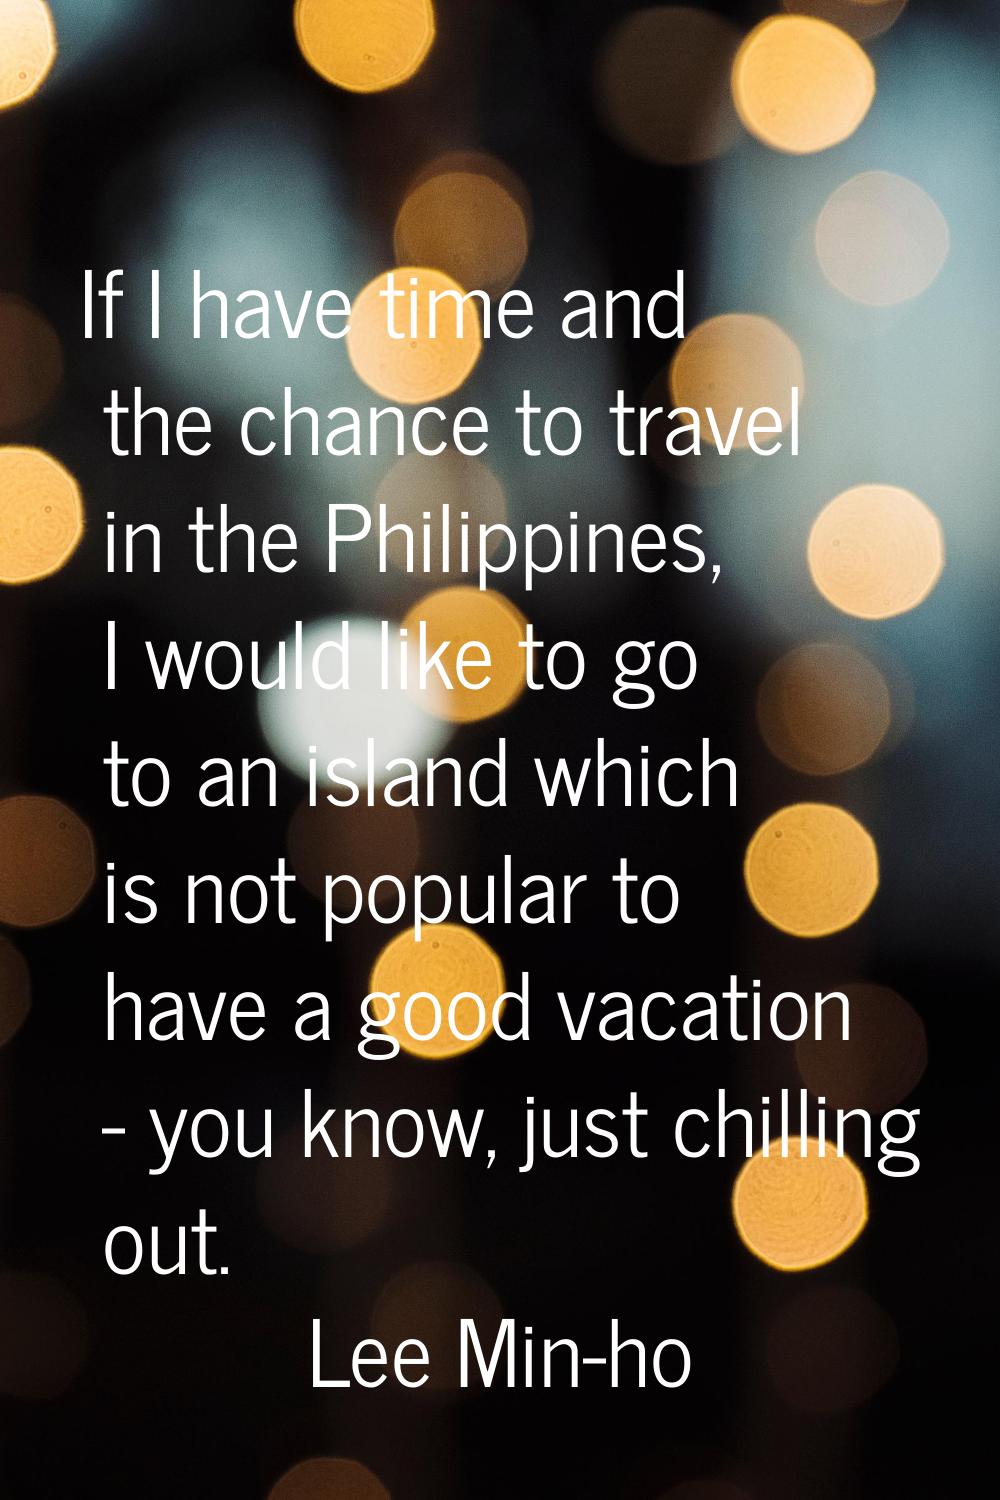 If I have time and the chance to travel in the Philippines, I would like to go to an island which i